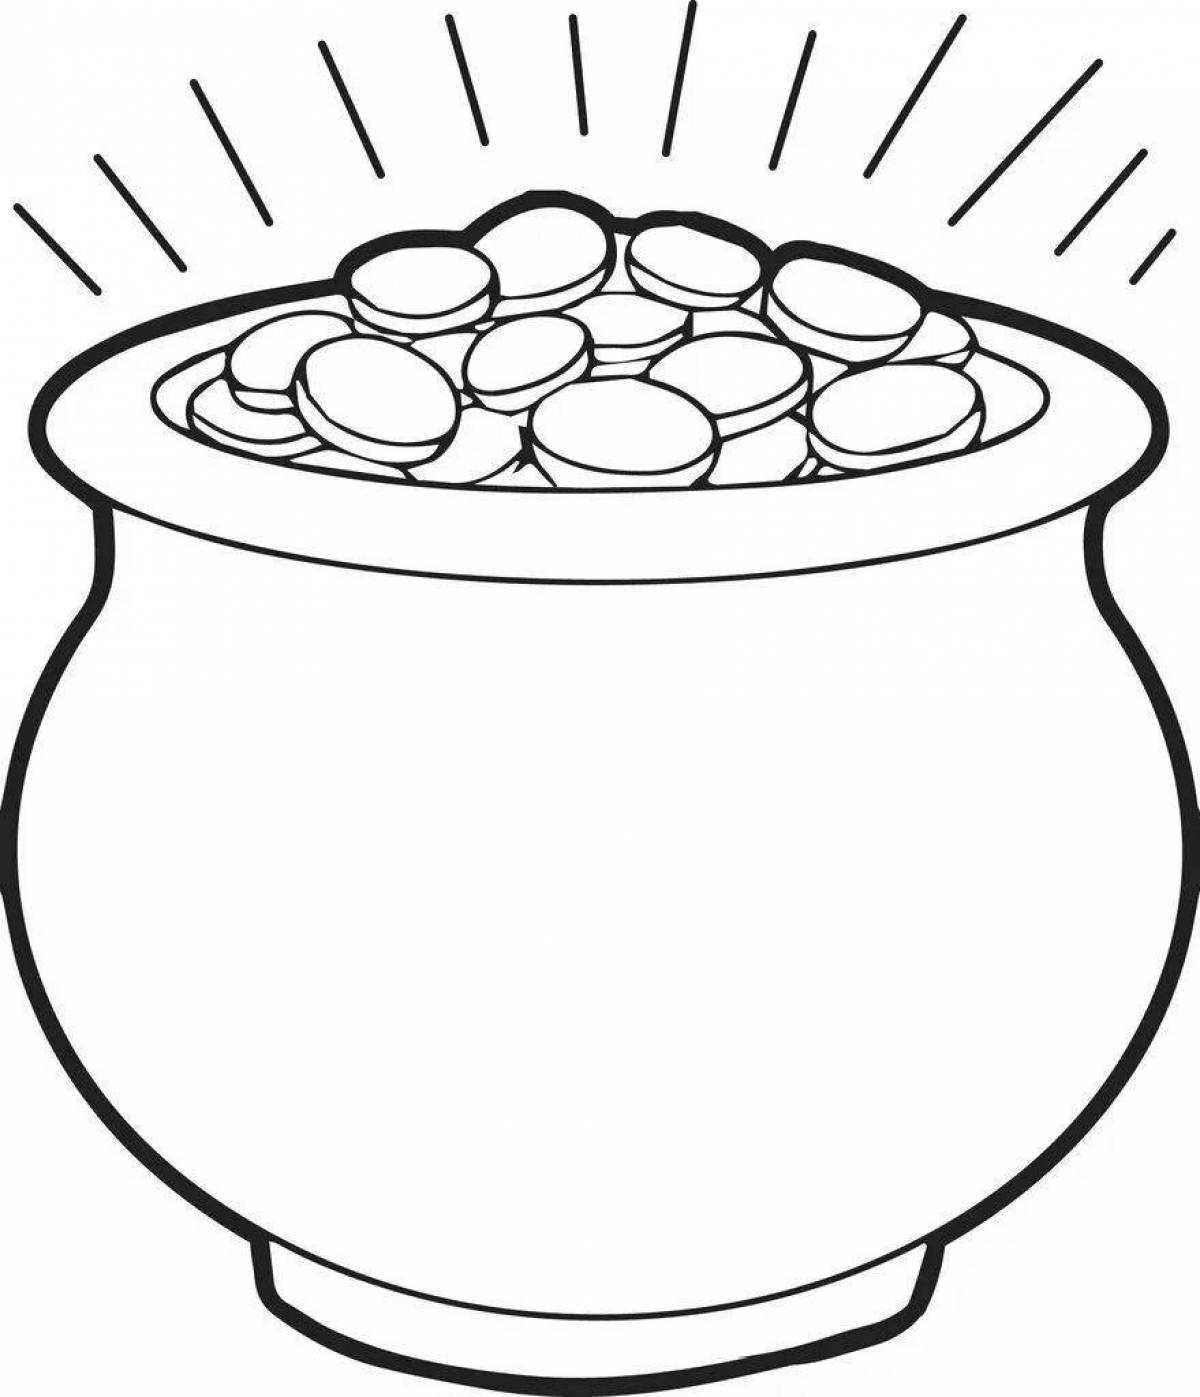 Coloring page of colorful playful pot